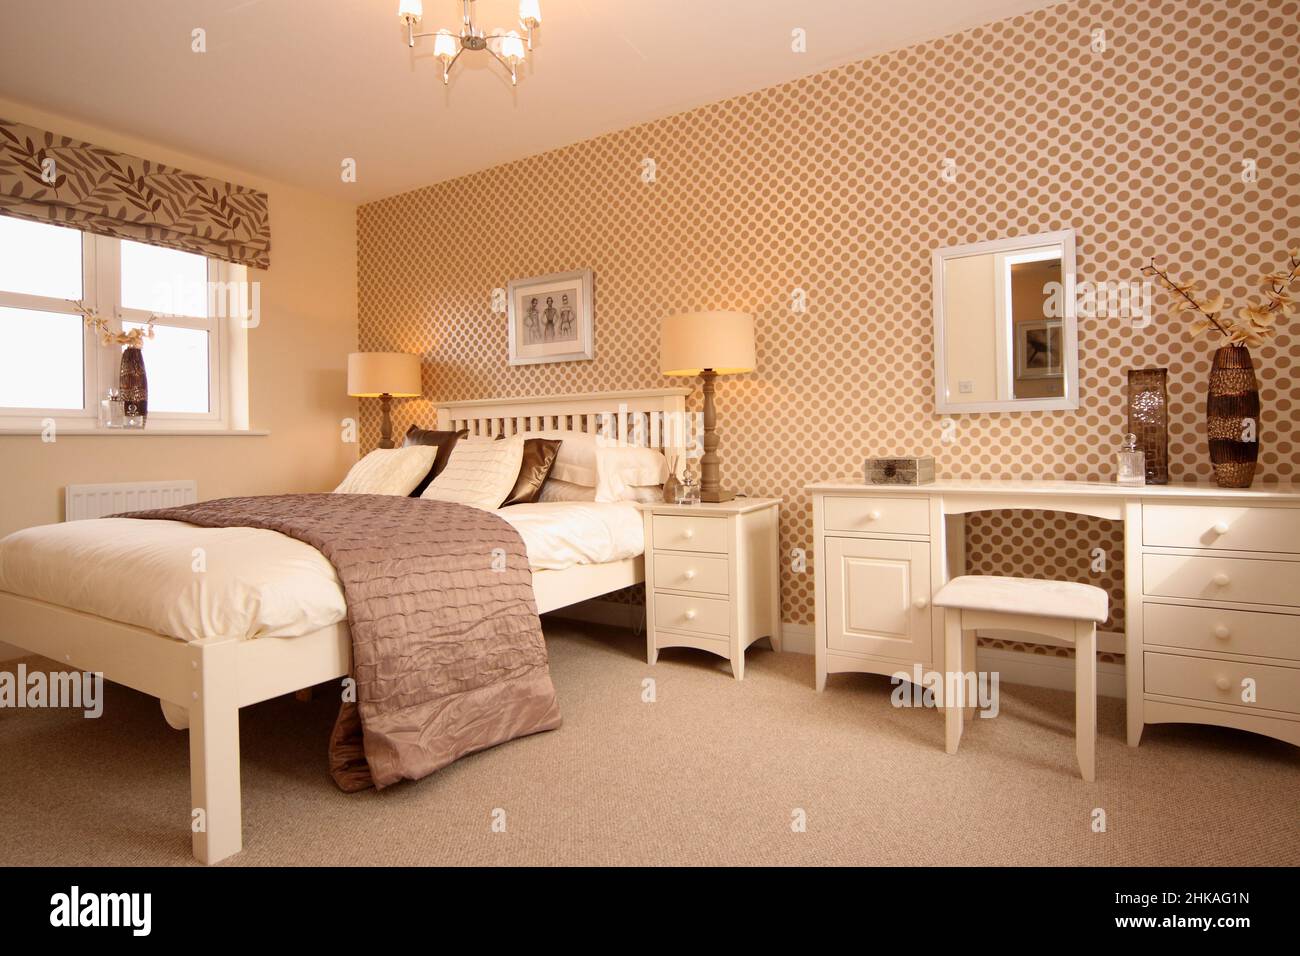 Bedroom with raised double kingsize bed, dressing table,bedside lights,bedspread,throw,feature wall Stock Photo